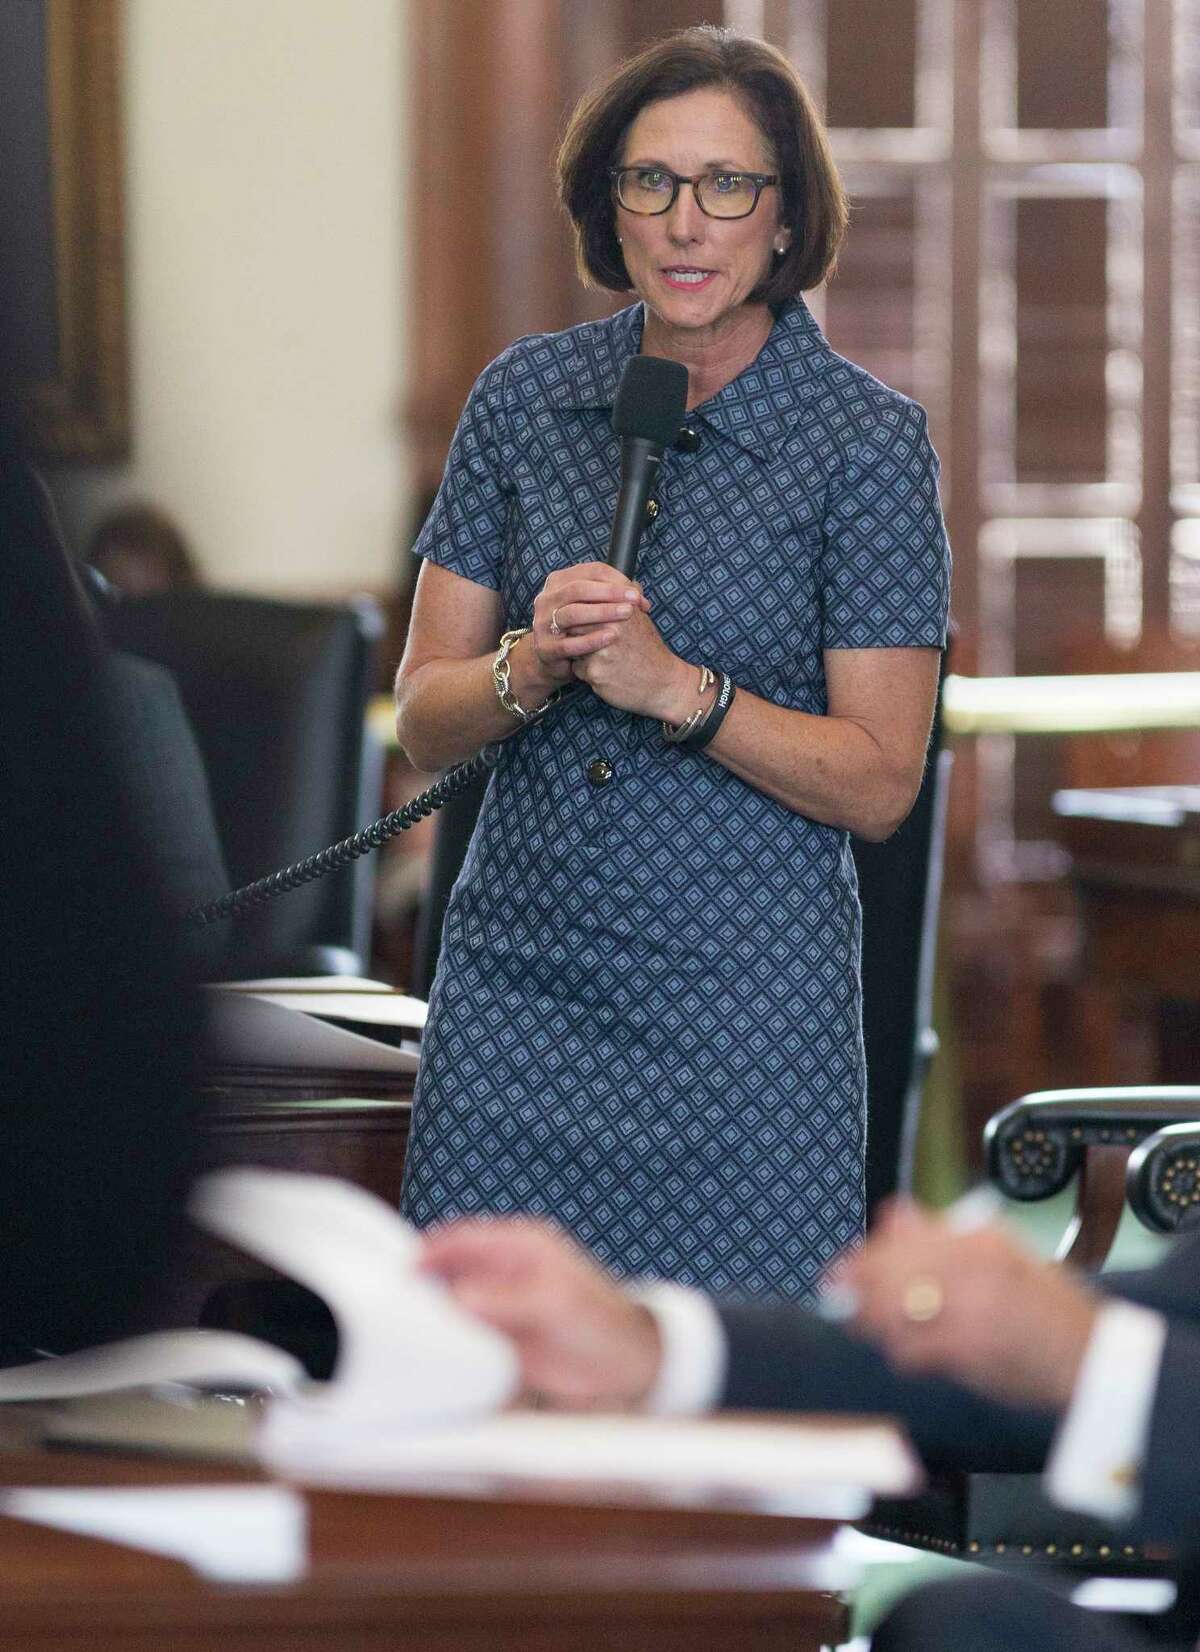 State Sen. Lois Kolkhorst, Brenham, speaks on the senate floor during the seventh day of a special session at the Texas Capitol in Austin, Monday, July 24, 2017. (Stephen Spillman / for Express-News)